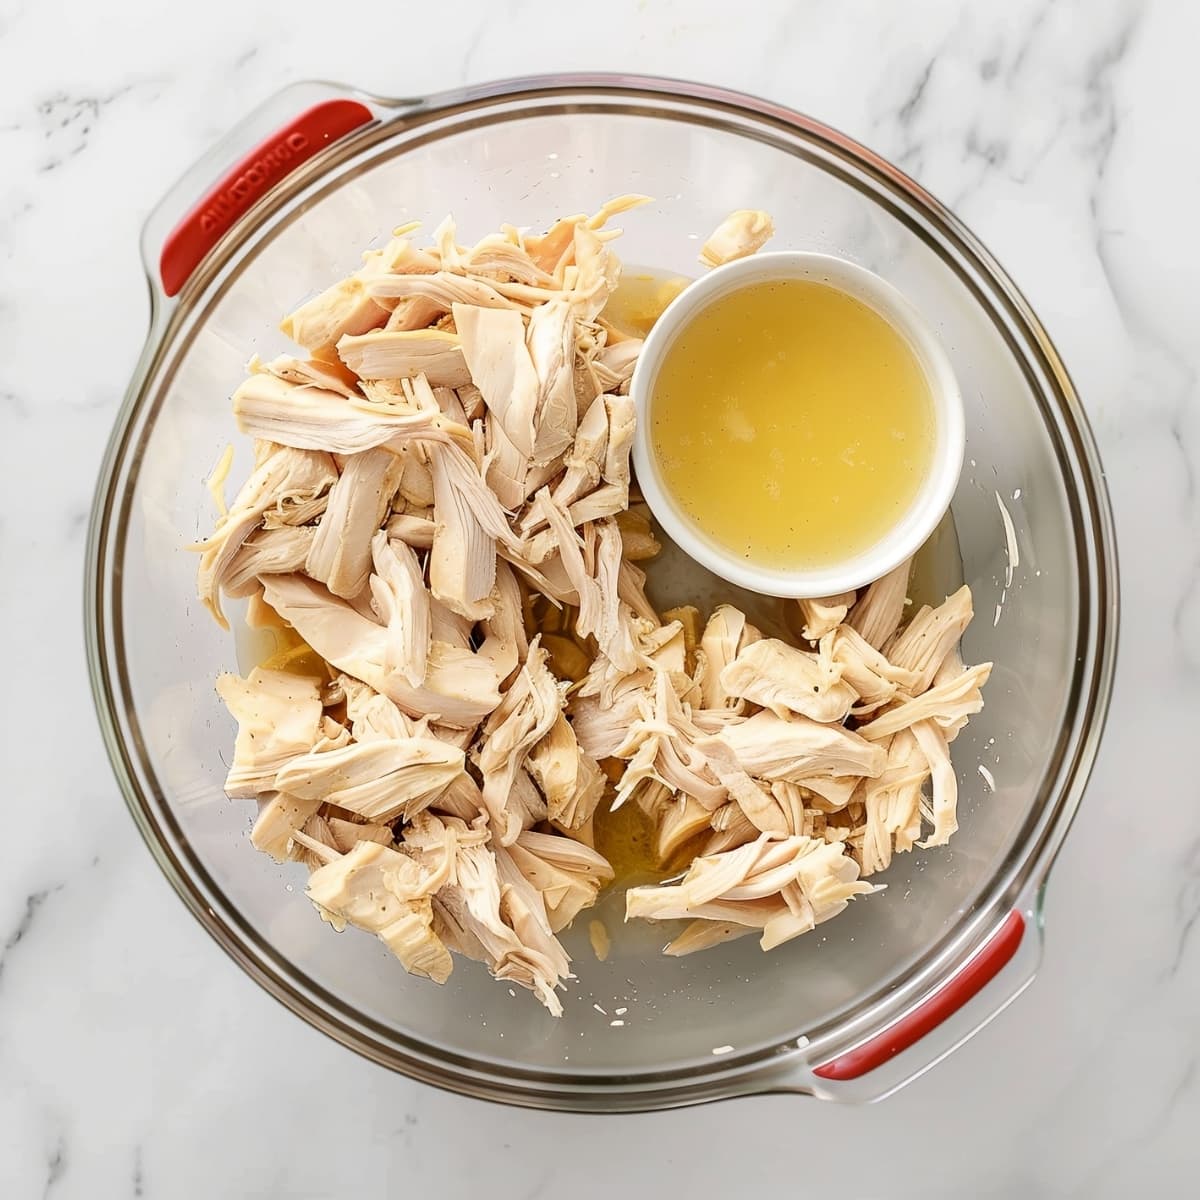 Shredded chicken with chicken broth in a glass bowl, top view